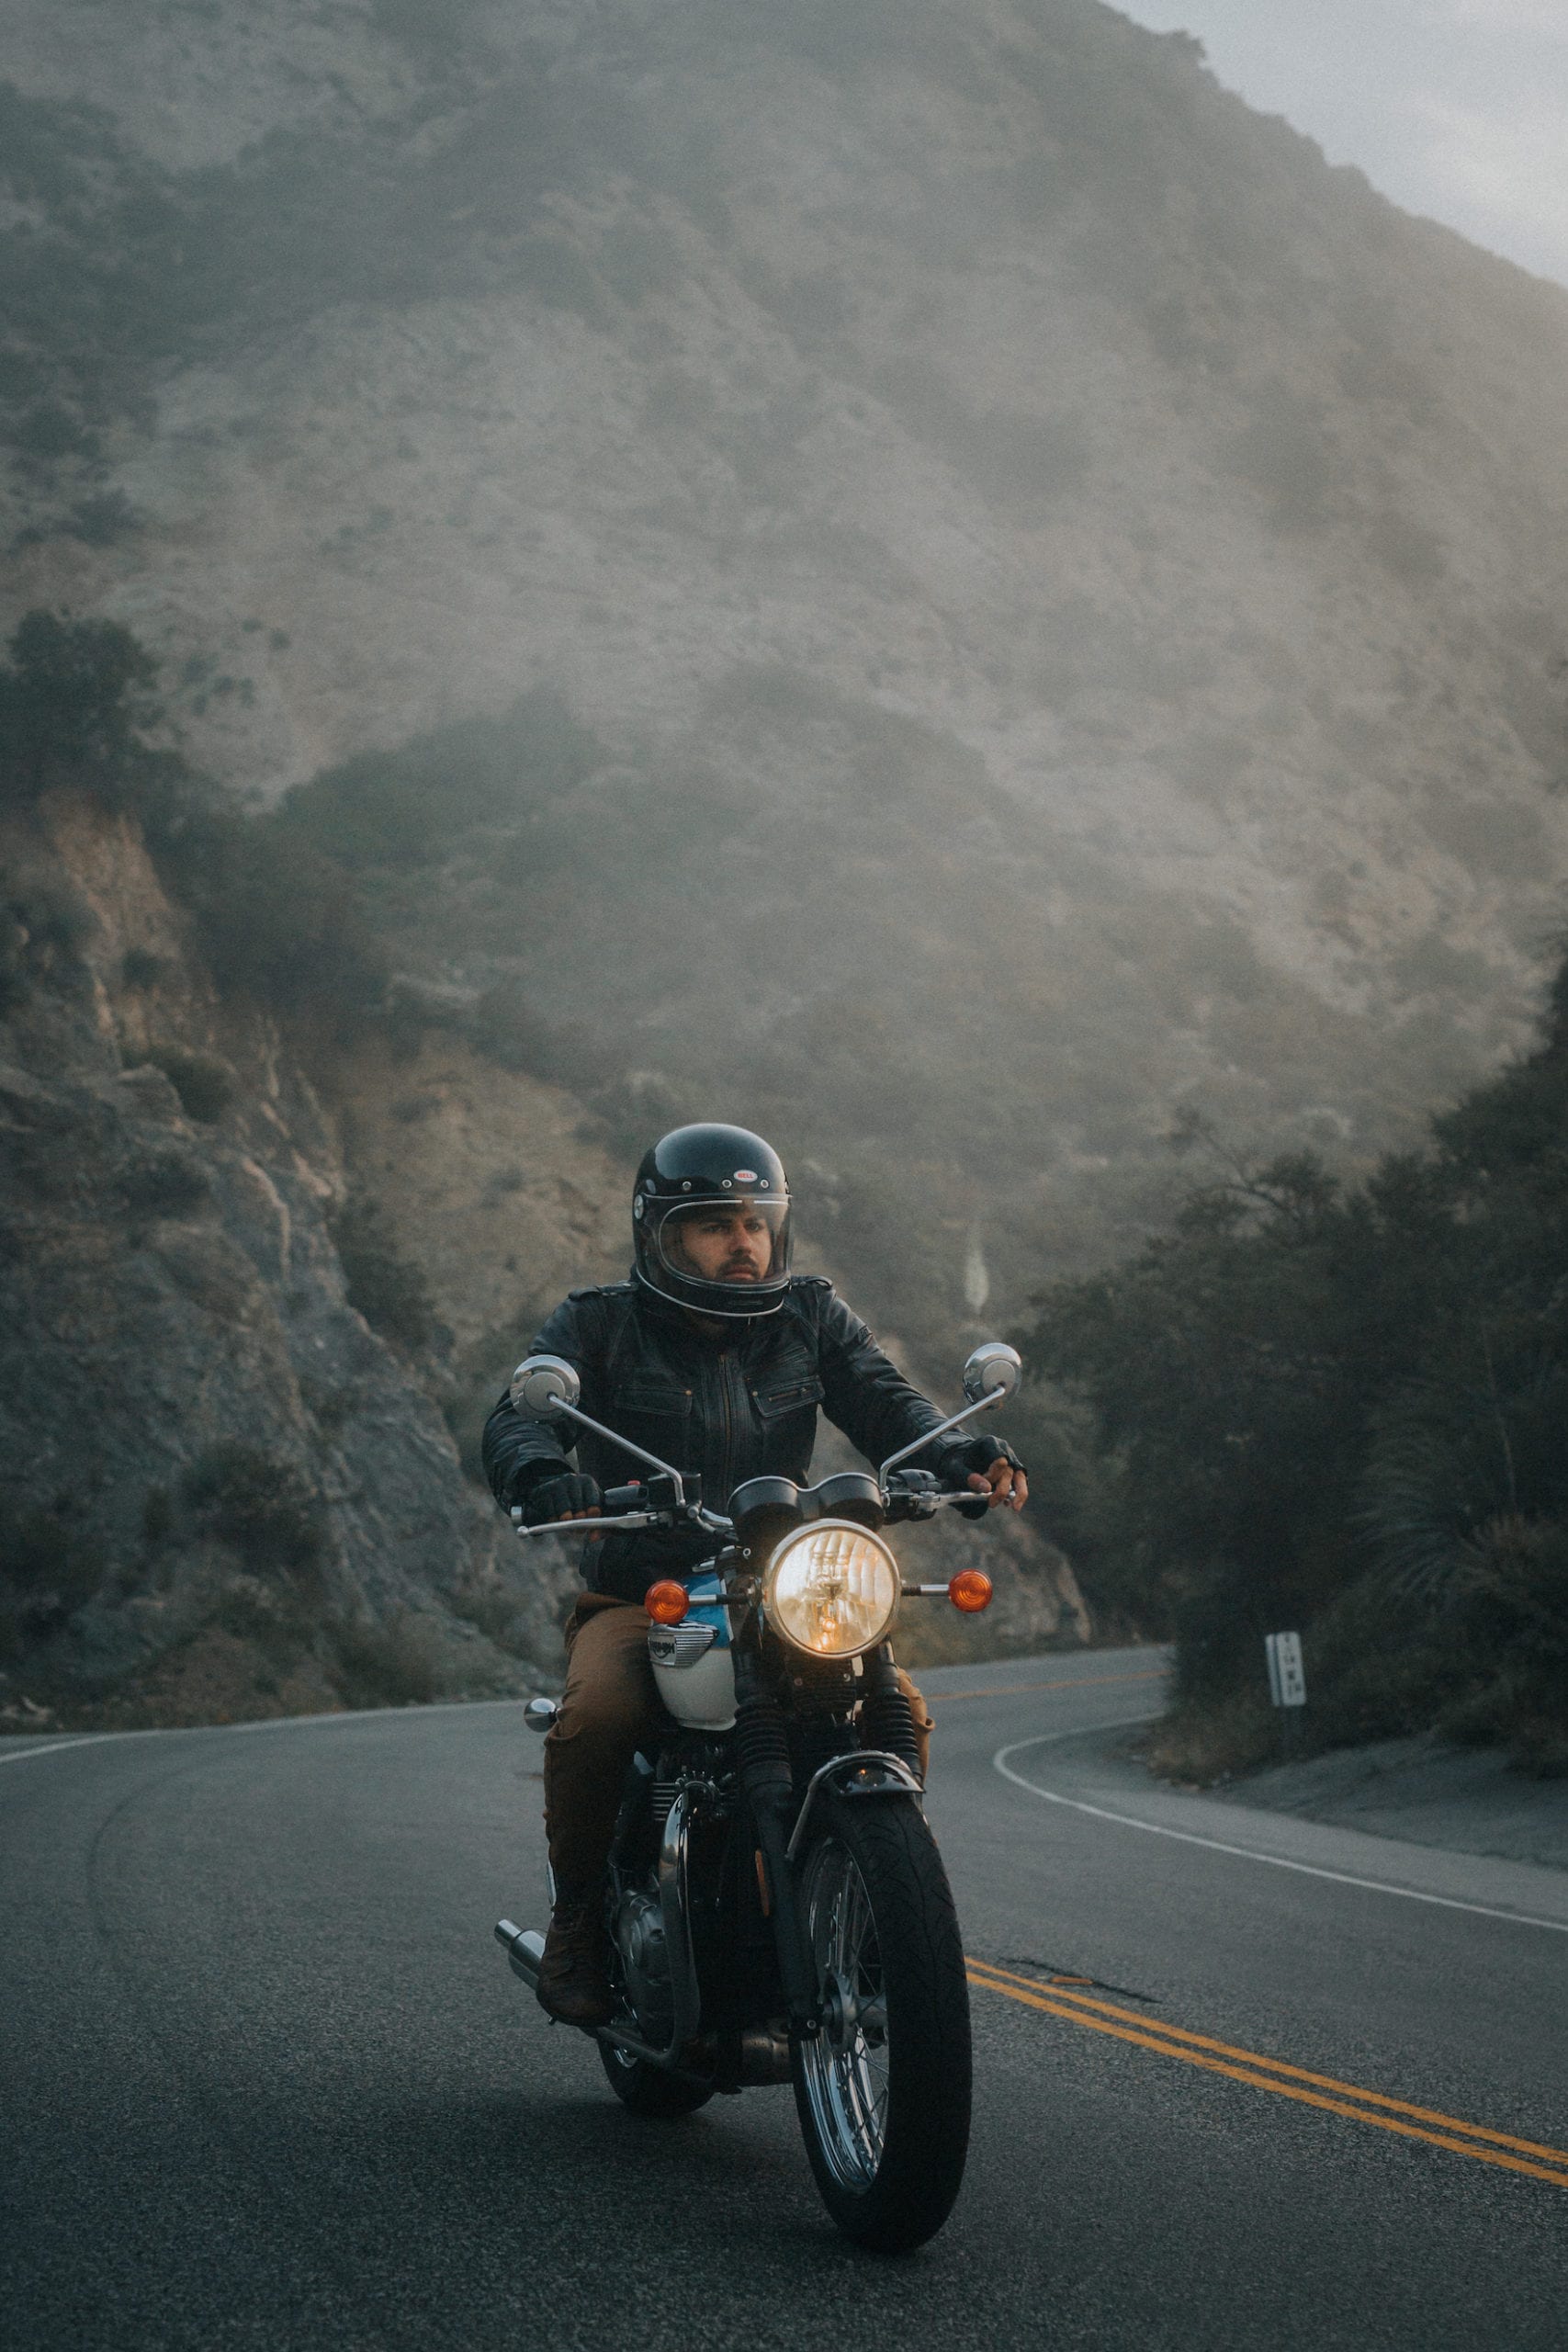 Motorcycle rider wearing a helmet and motorcycle gear riding up the mountain on a hazy morning.